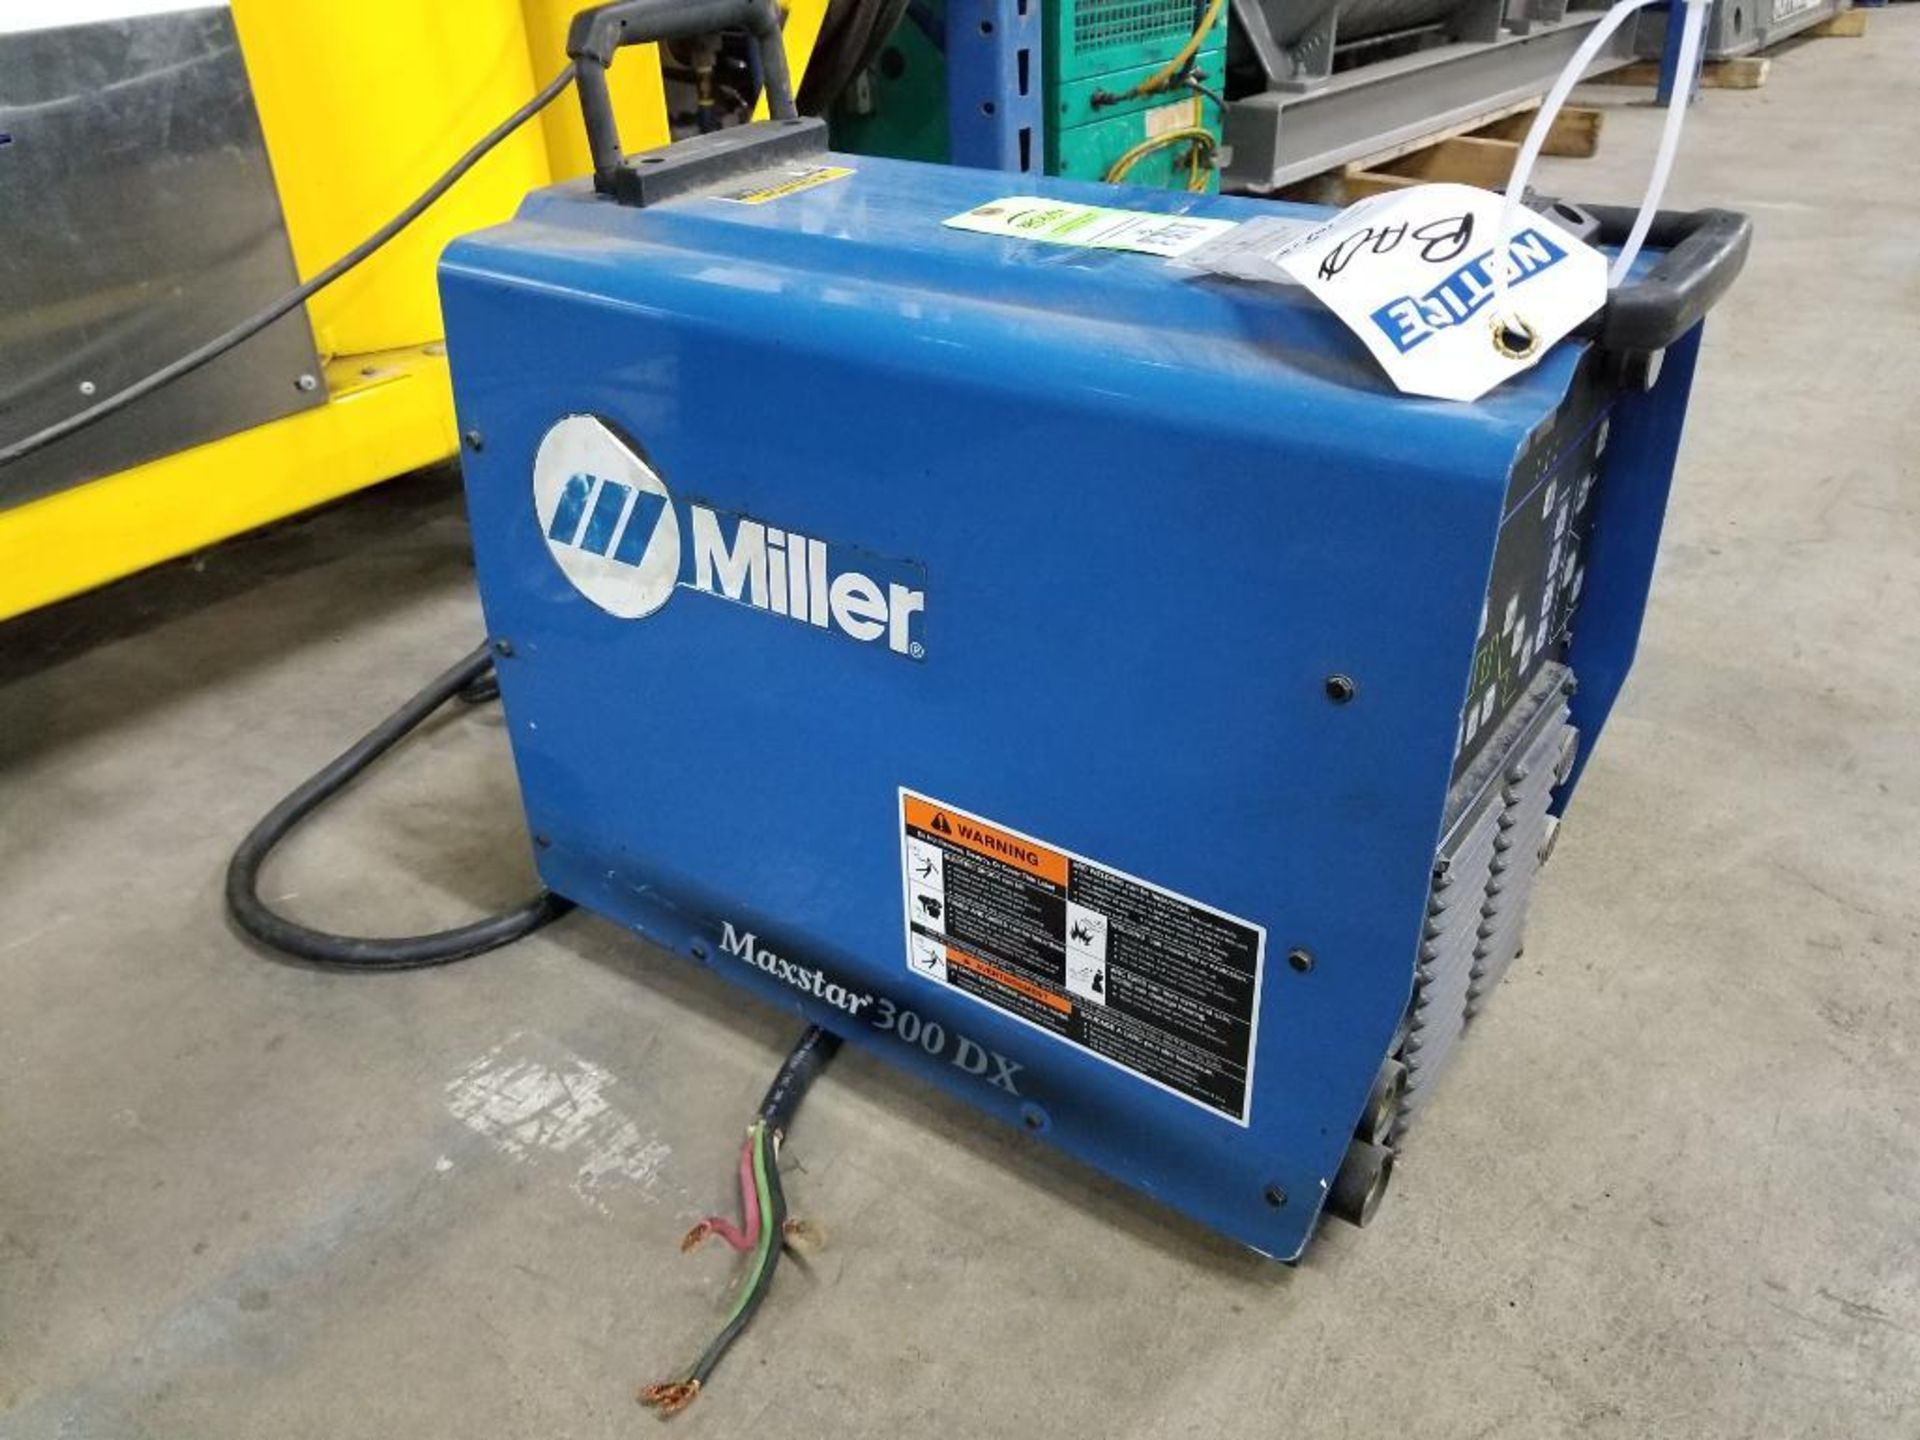 (Parts repairable) Miller Maxstar 300DX welder power supply. 230/460v single OR 3 phase. - Image 5 of 5